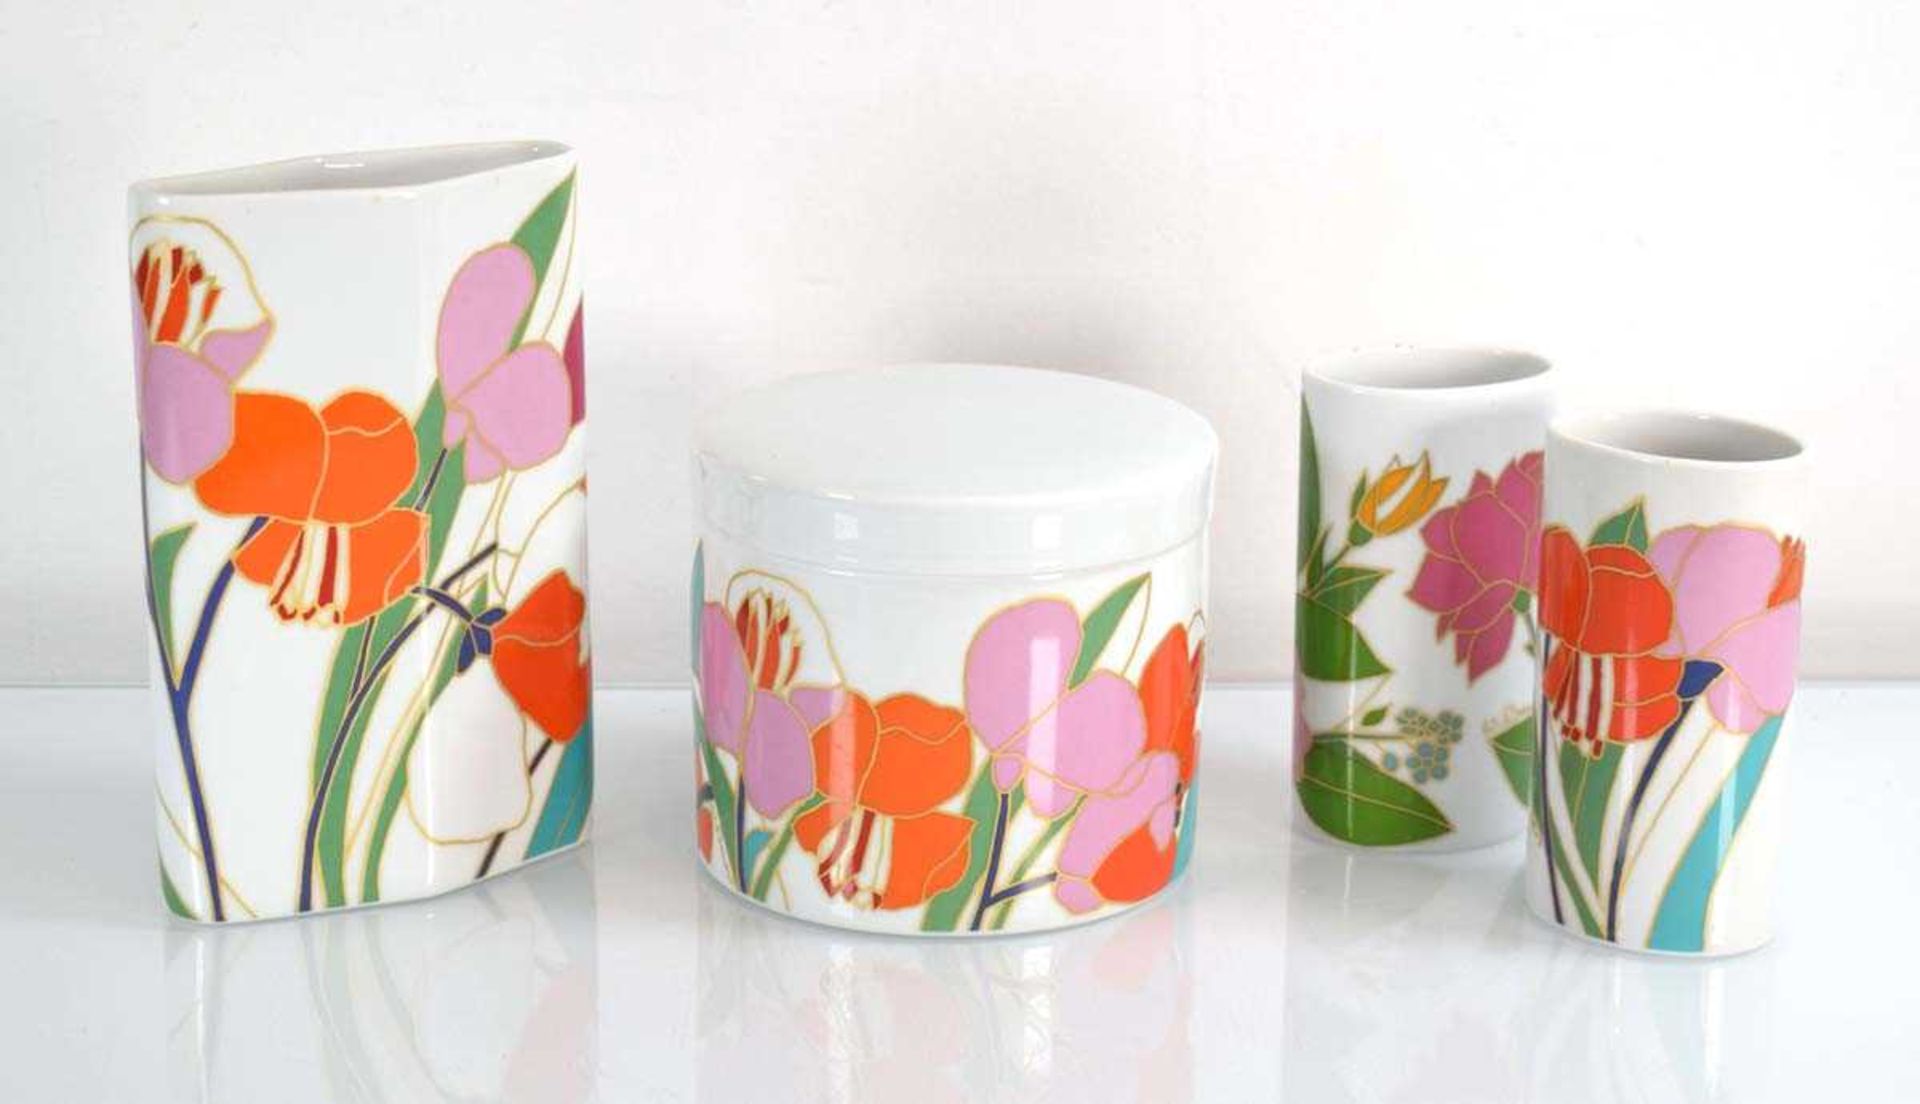 Wolf Bauer for Rosenthal, a group of 1970's Studio-Line floral porcelain including a container and